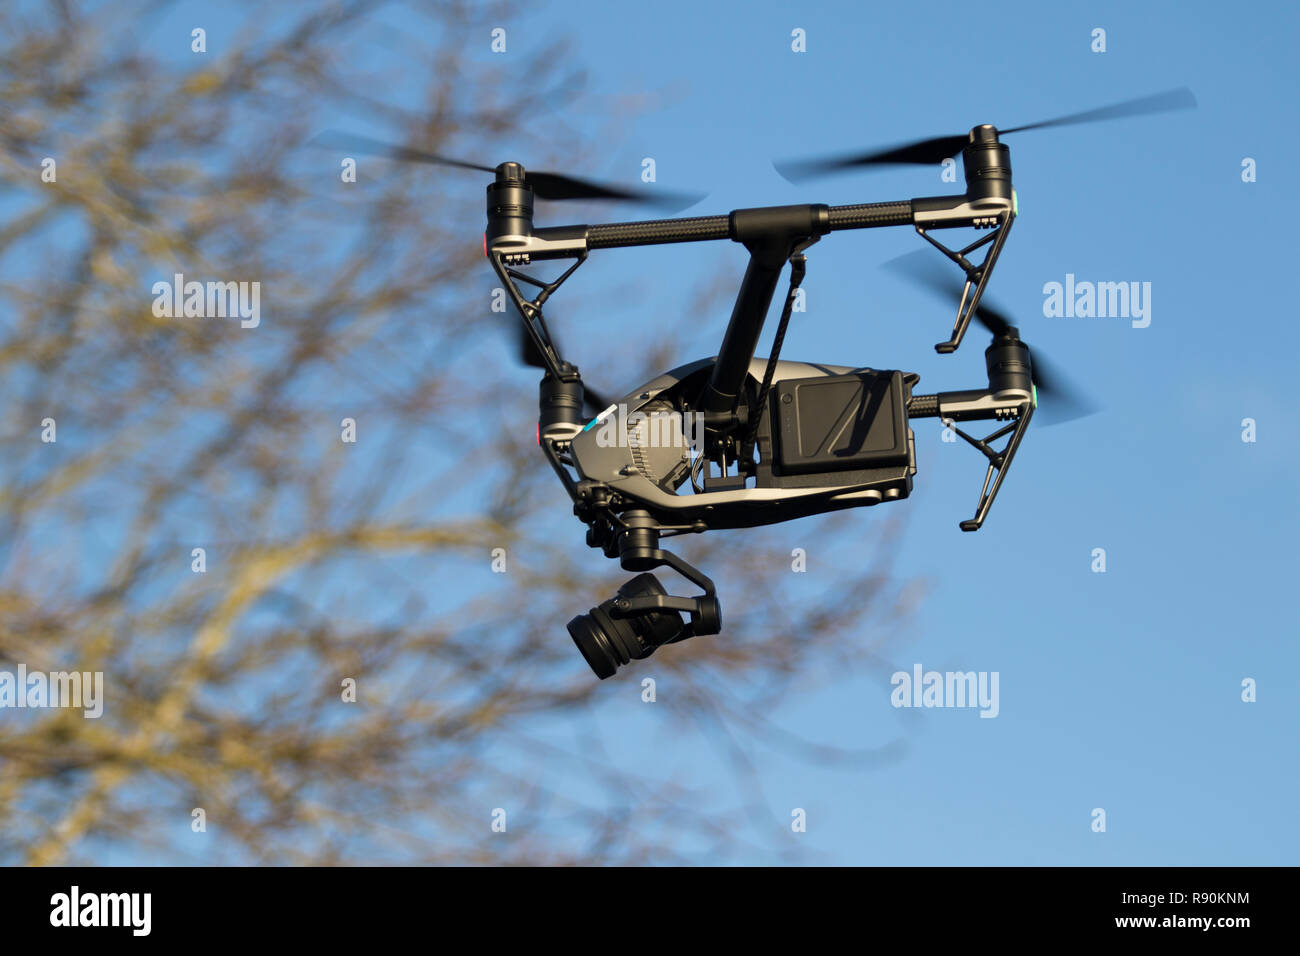 Drone flying in the air against trees and blue sky- DJI Inspire 2 Stock Photo